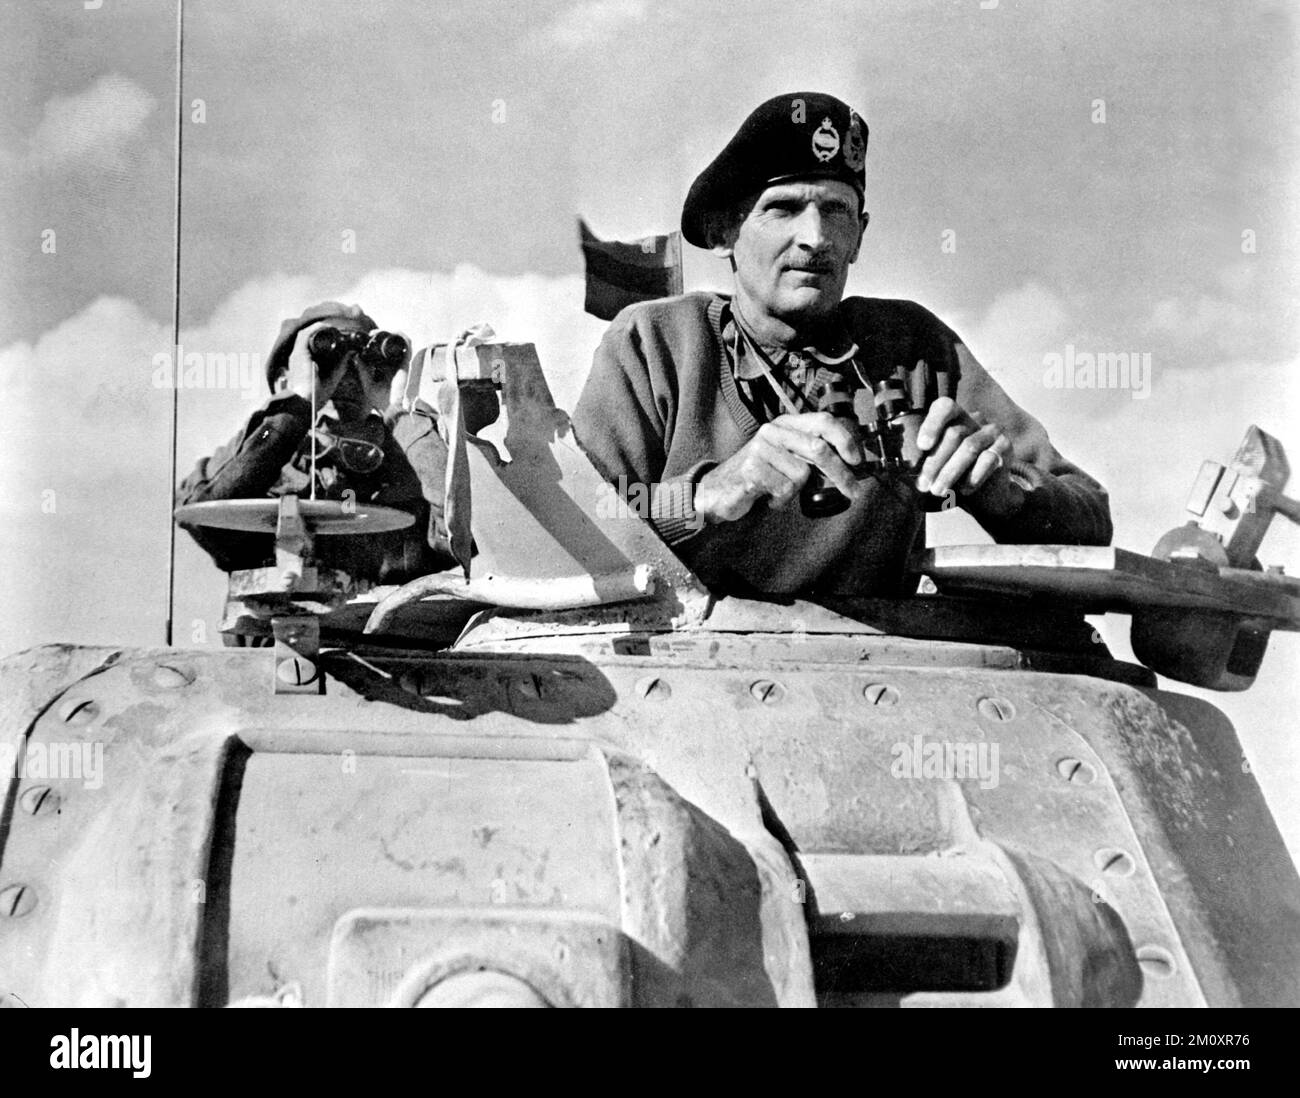 Montgomery in a Grant tank in North Africa, November 1942. Monty, General Montgomery, General Sir Bernard Montgomery in England, 1943 Portrait of the Commander of the Eighth Army General Sir Bernard Montgomery taken during a visit to England. Field Marshal Bernard Law Montgomery, 1st Viscount Montgomery of Alamein, (1887 – 1976), nicknamed "Monty", was a senior British Army officer who served in the First World War, the Irish War of Independence and the Second World War Stock Photo